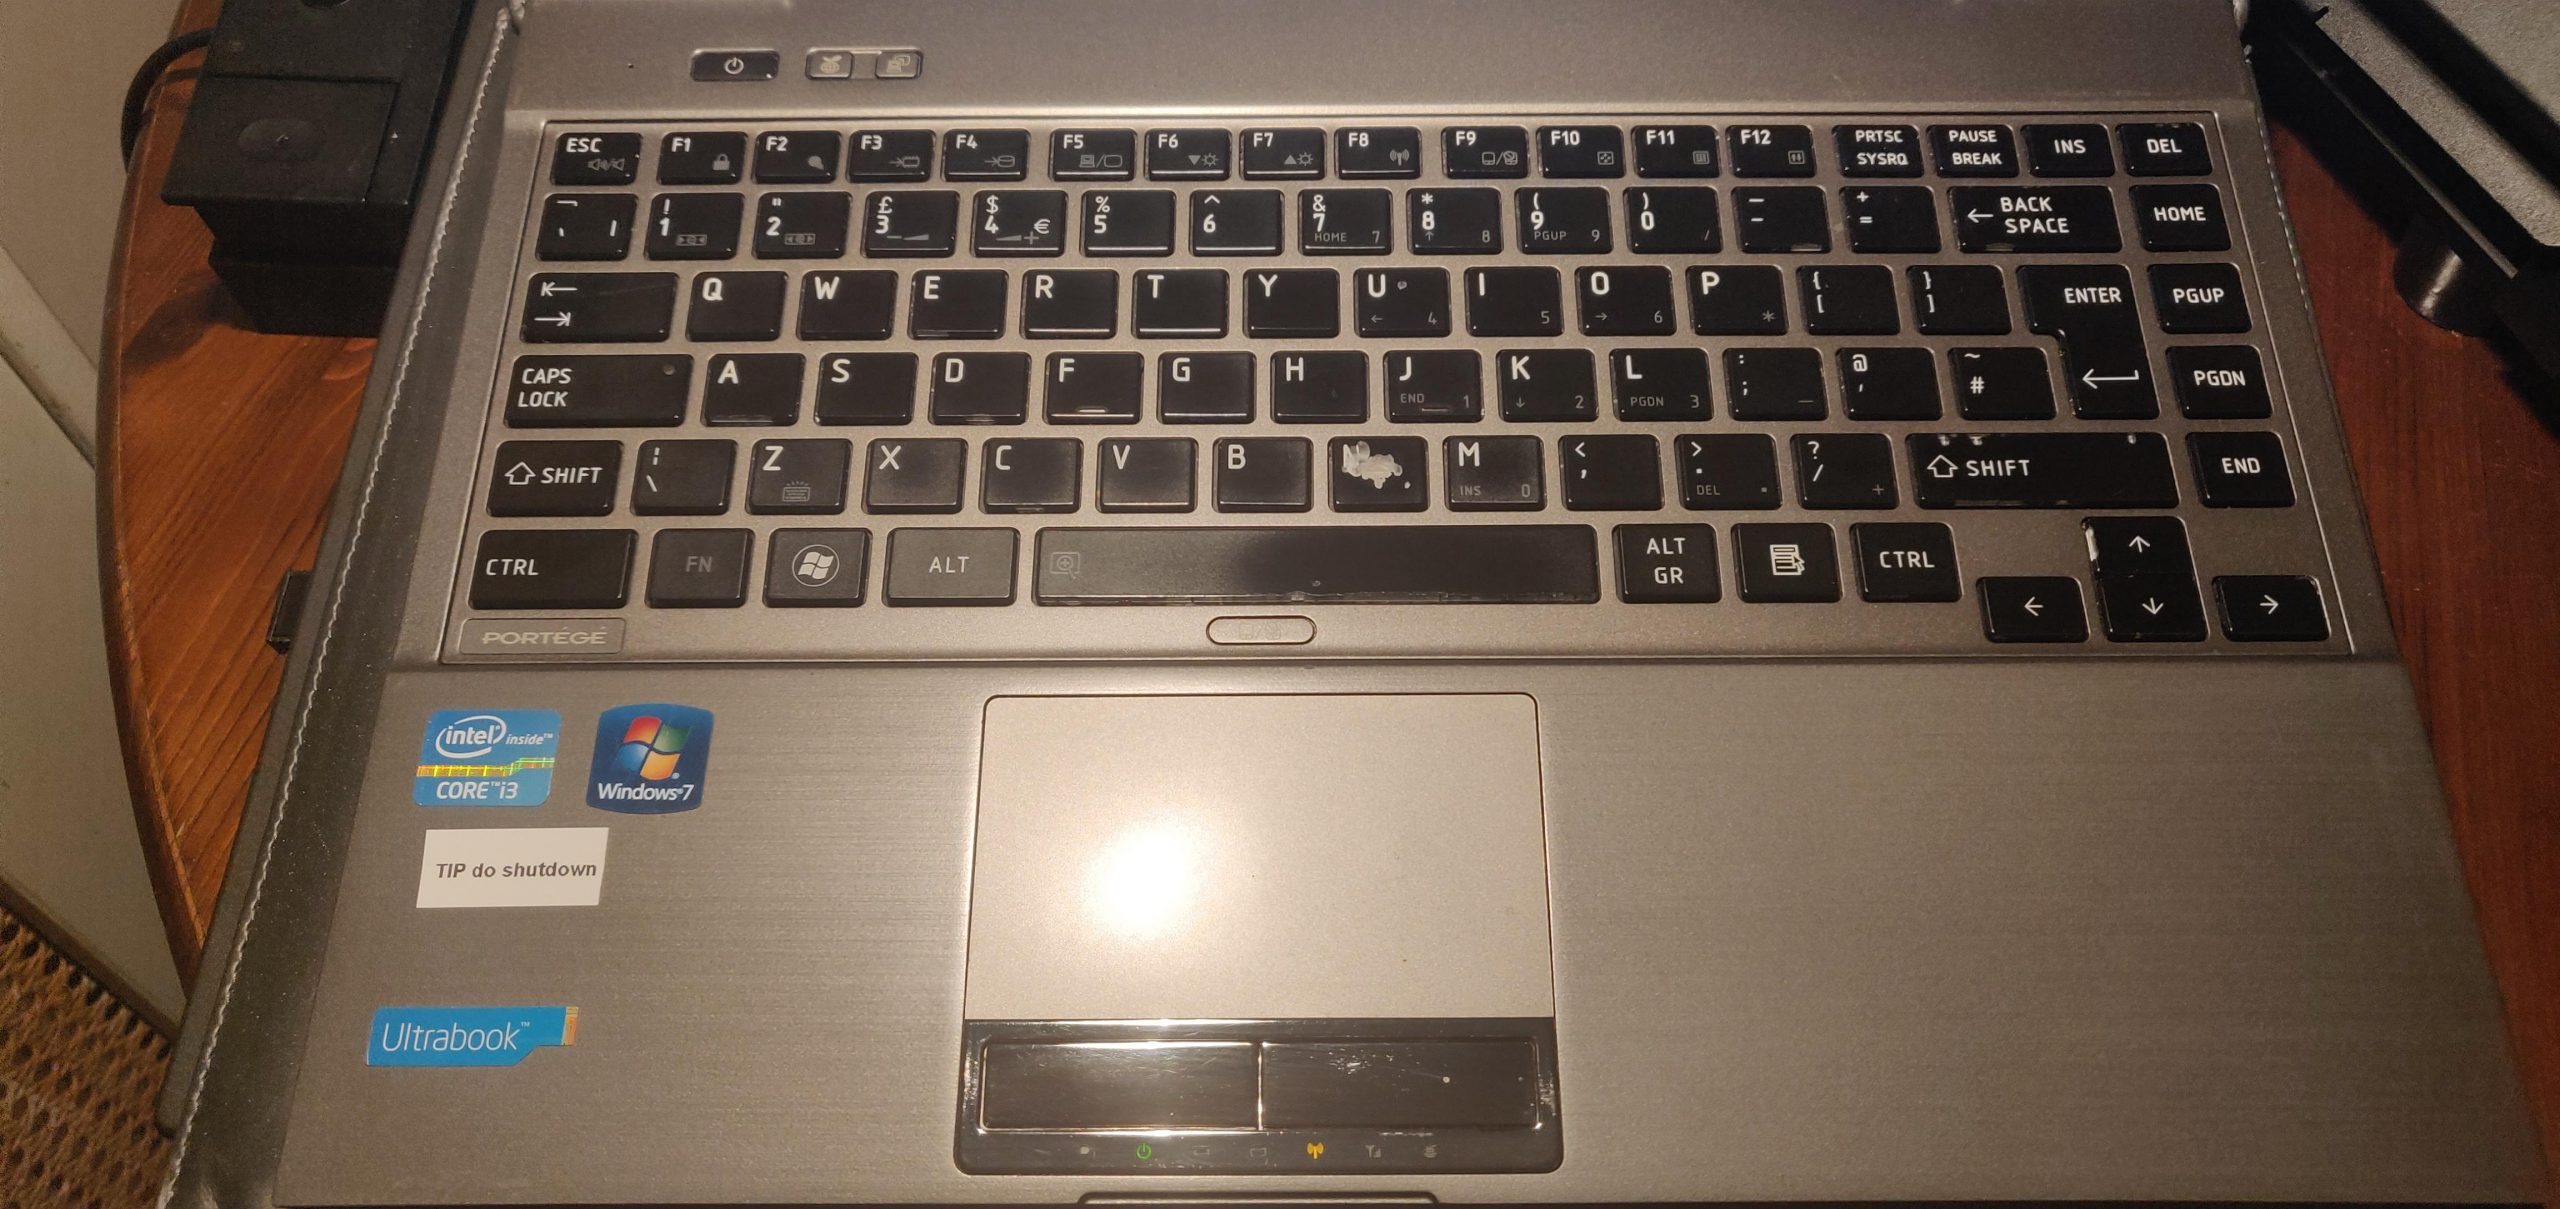 the buttons to press to reset a Toshiba laptop when the lithium